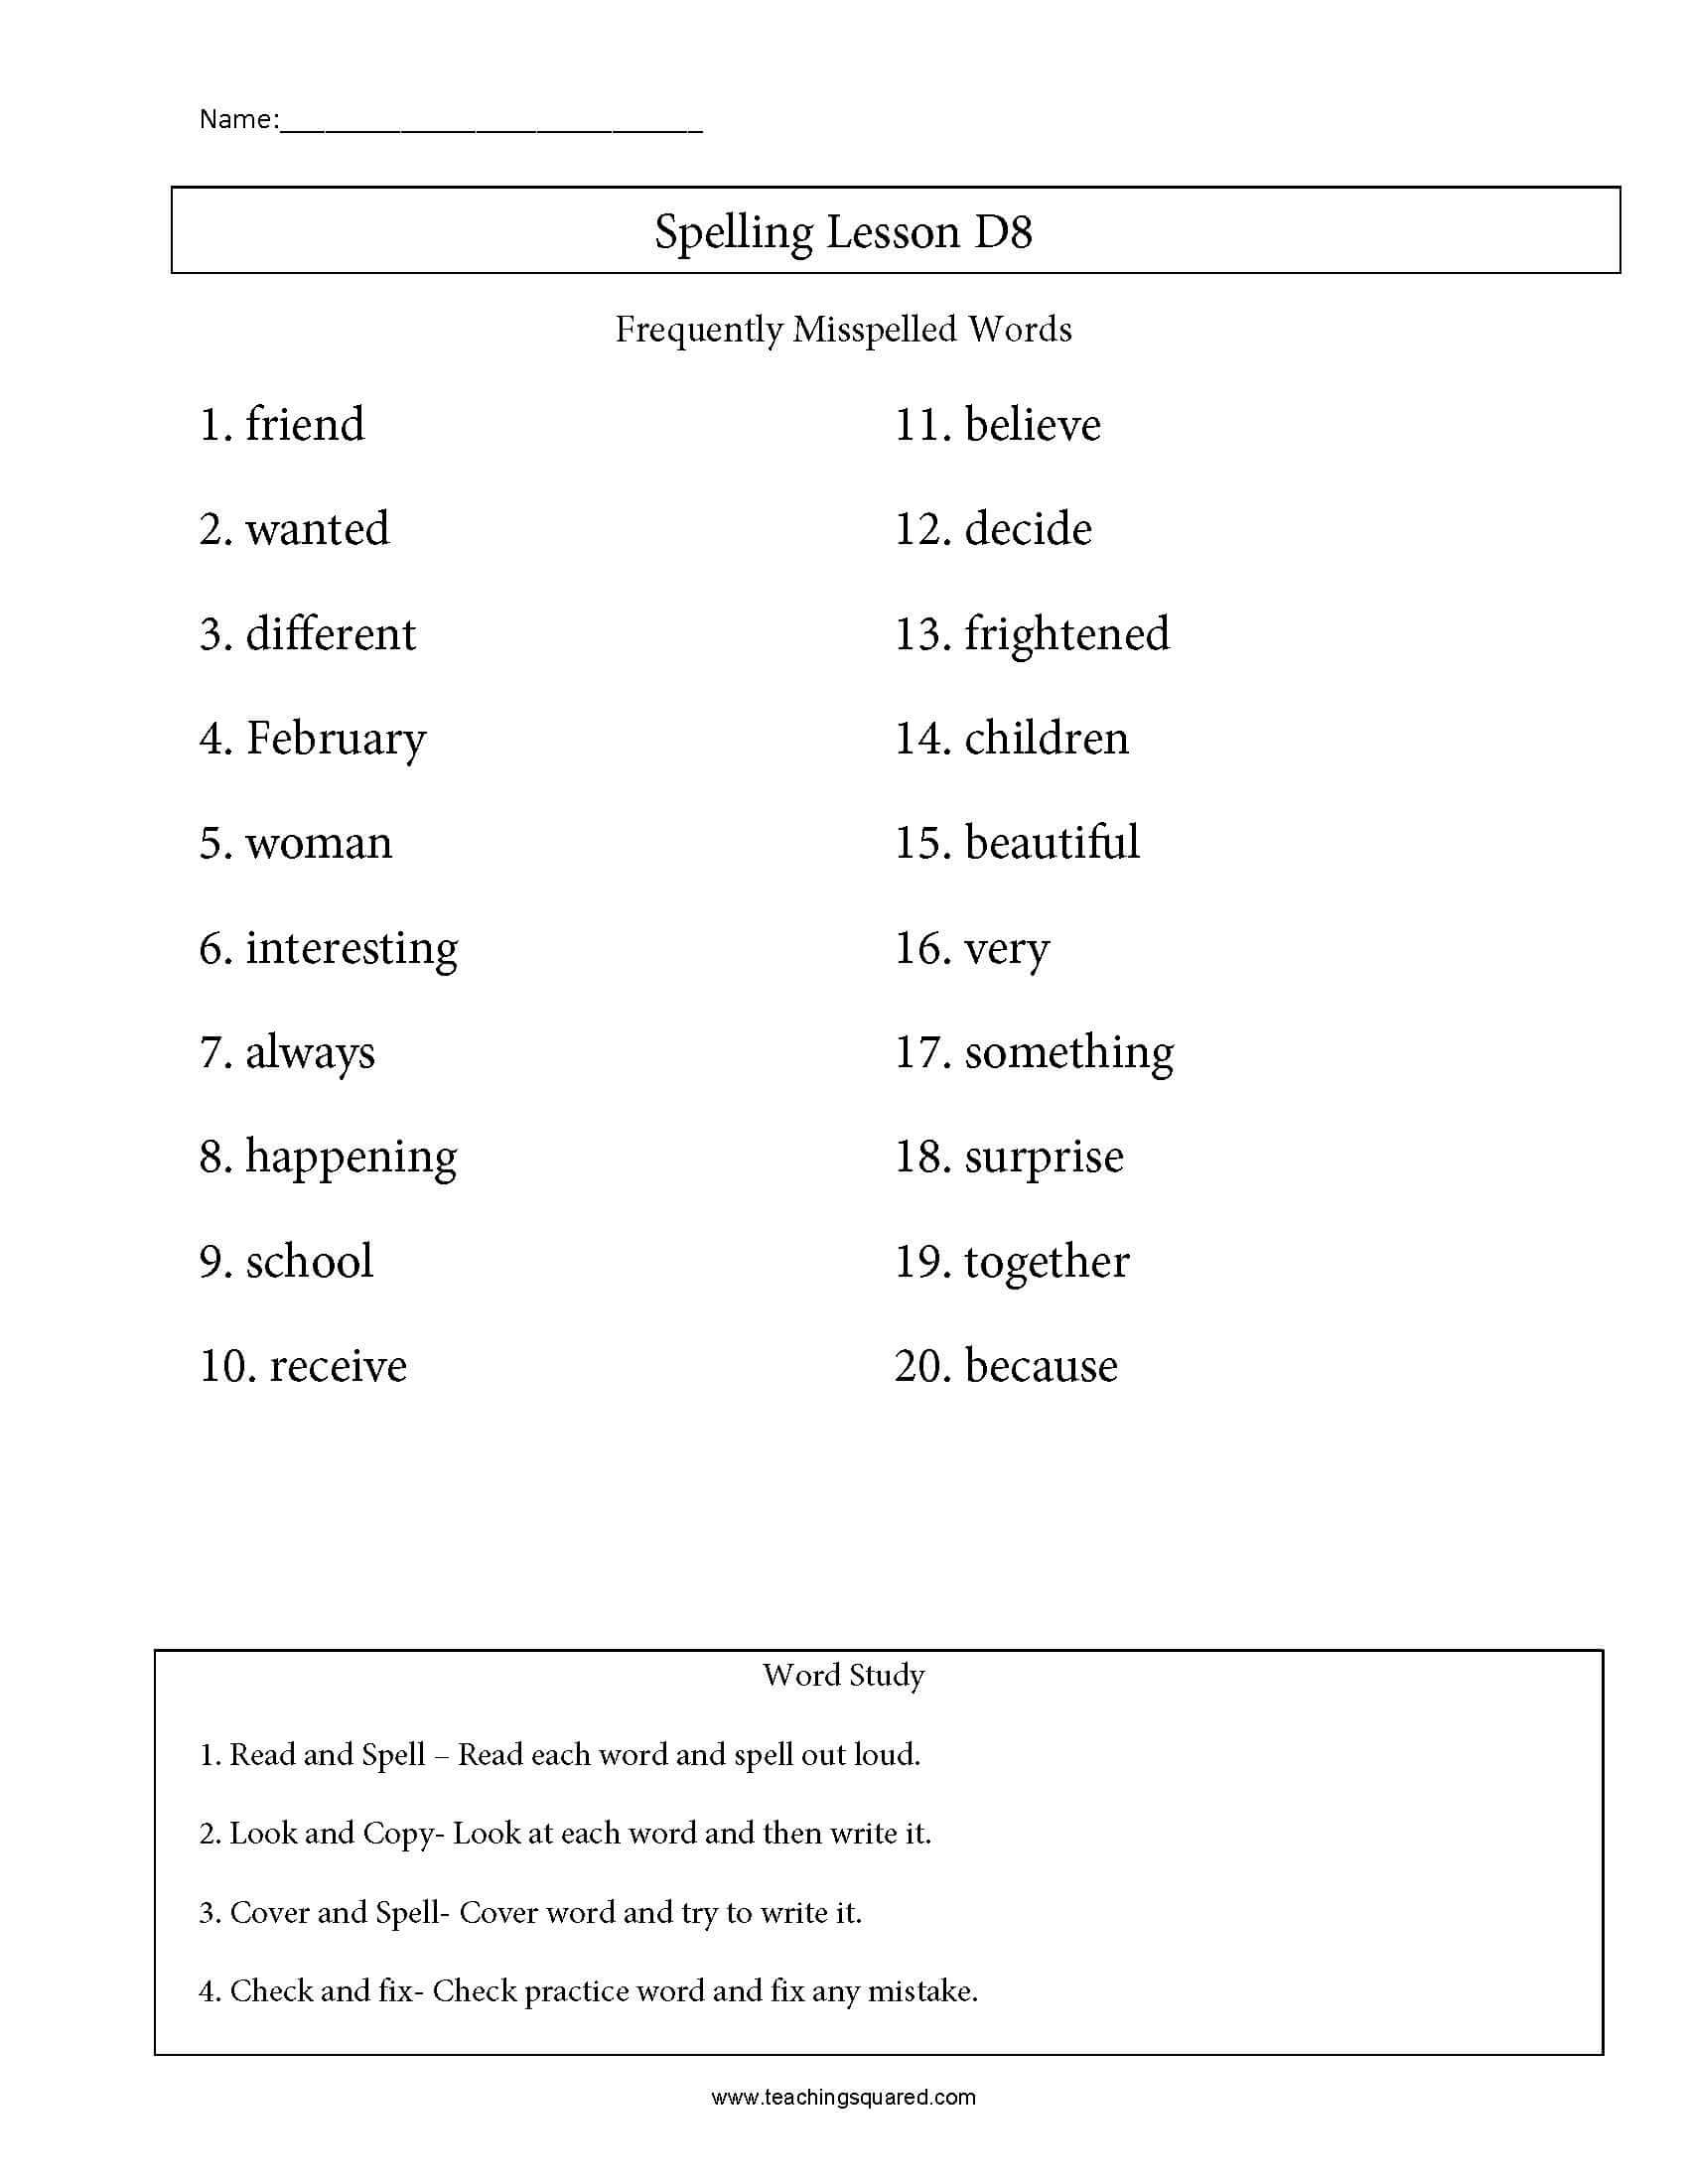 Spelling List D11- Misspelled Words - Teaching Squared Within Commonly Misspelled Words Worksheet